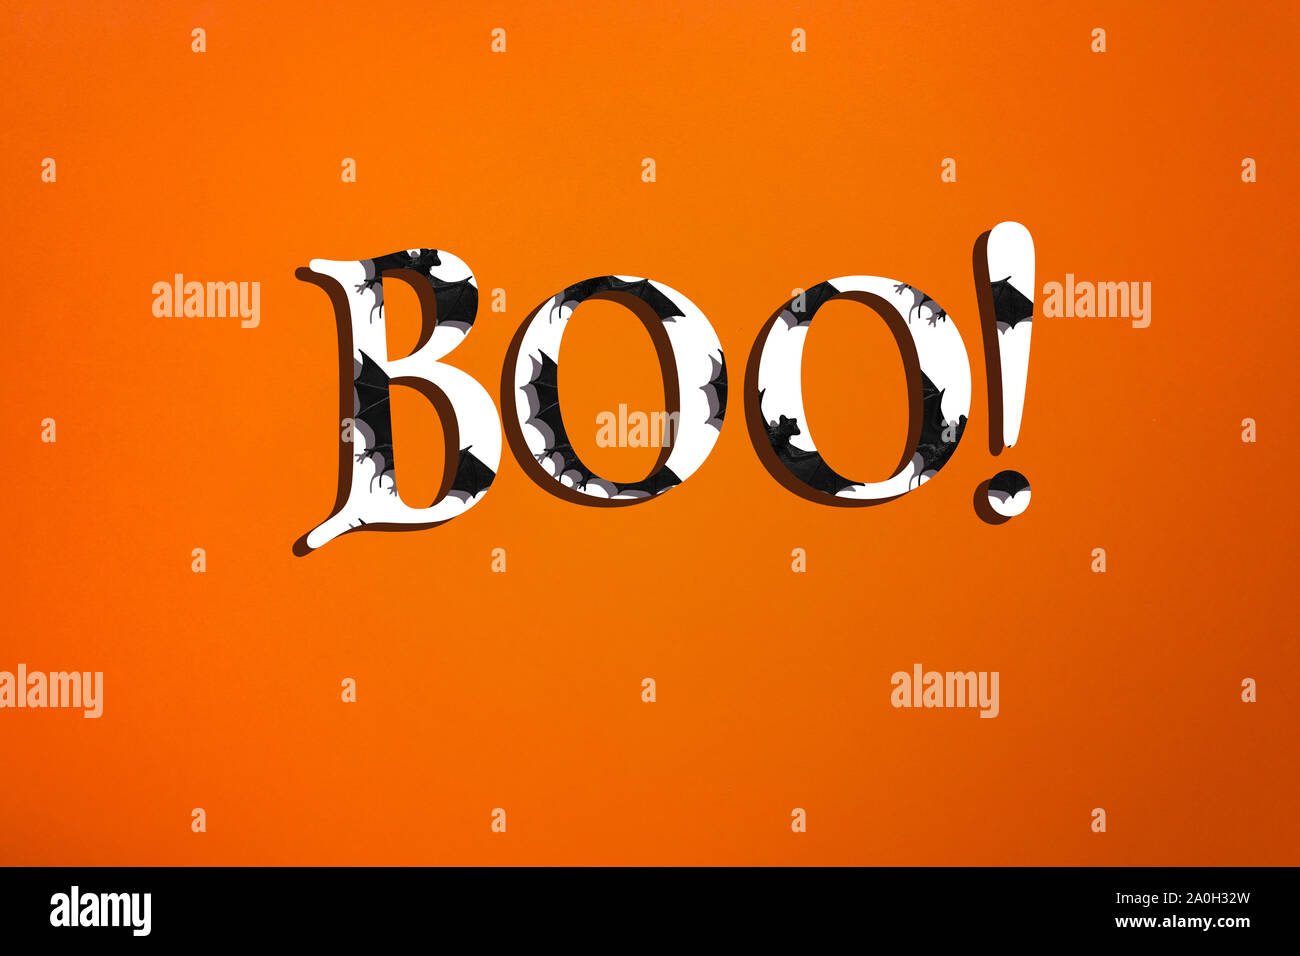 Creative minimalistic halloween text on orange background. White letters with bats and shadows. Stock Photo